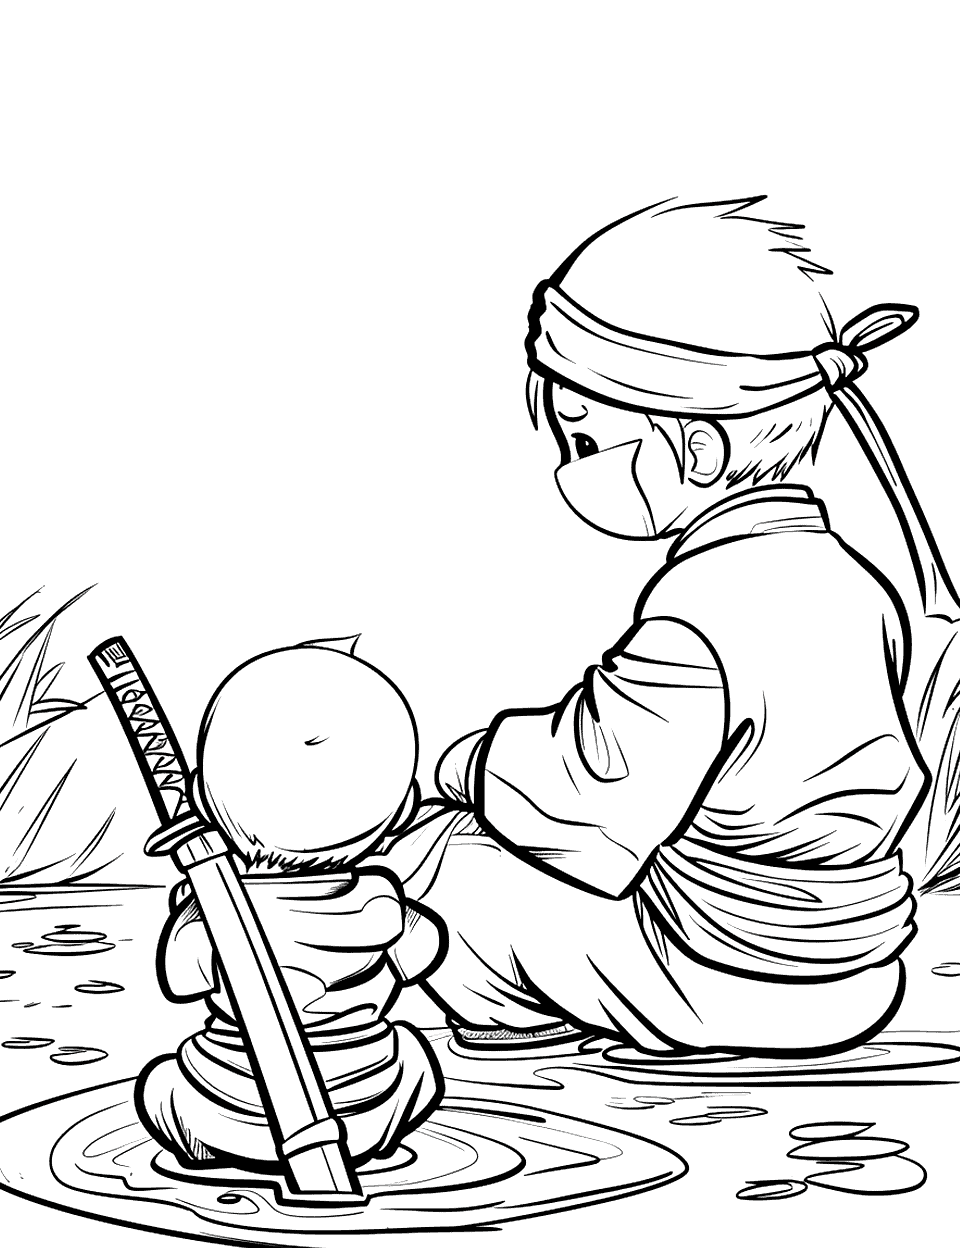 Sensei's Lesson on Patience Ninja Coloring Page - A sensei teaching a young ninja the importance of patience, sitting by a calm pond.